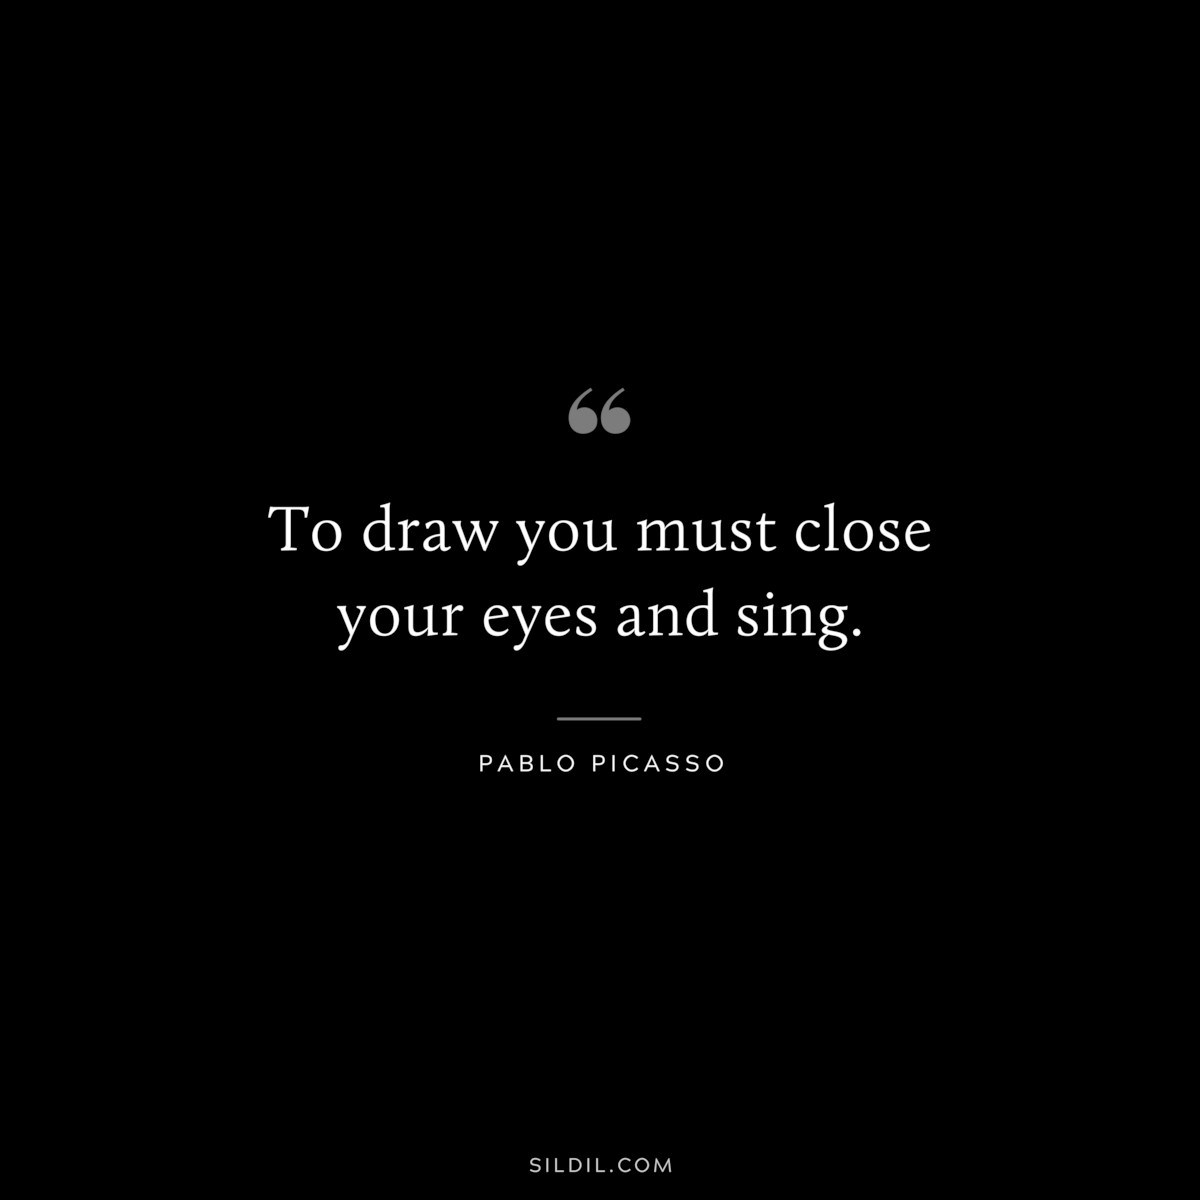 To draw you must close your eyes and sing. ― Pablo Picasso